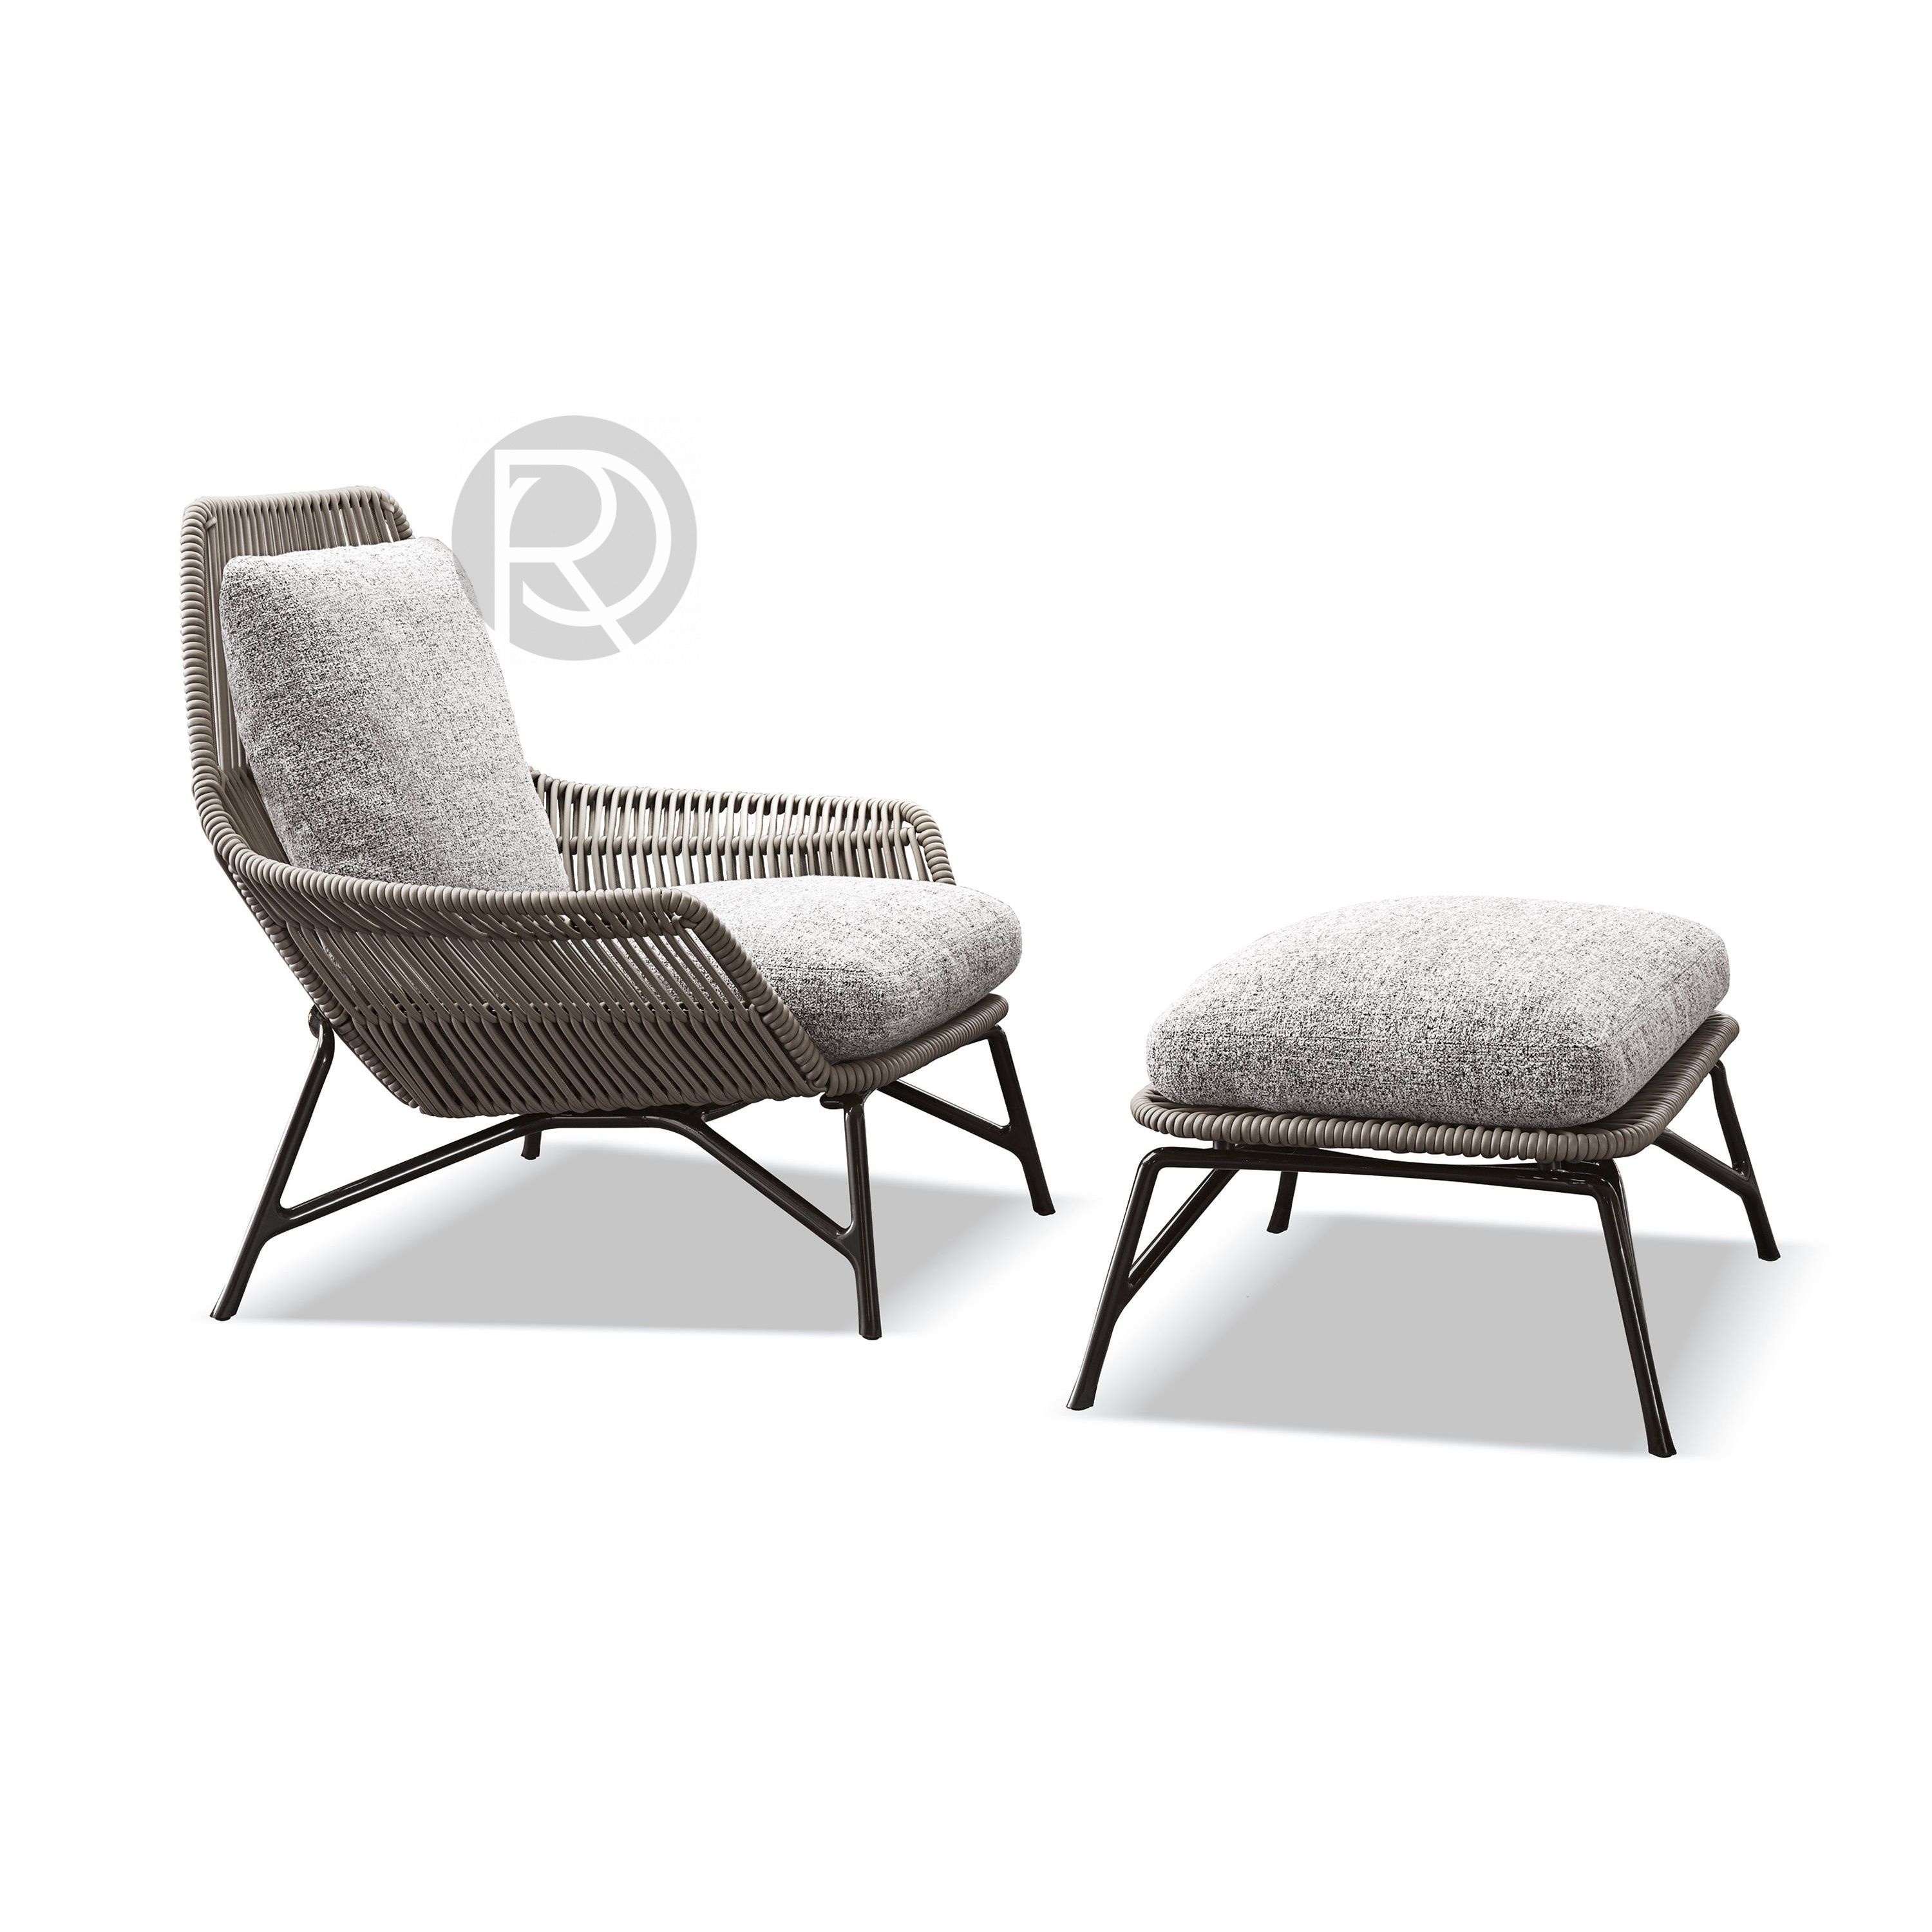 Outdoor chair PRINCE CORD by Minotti